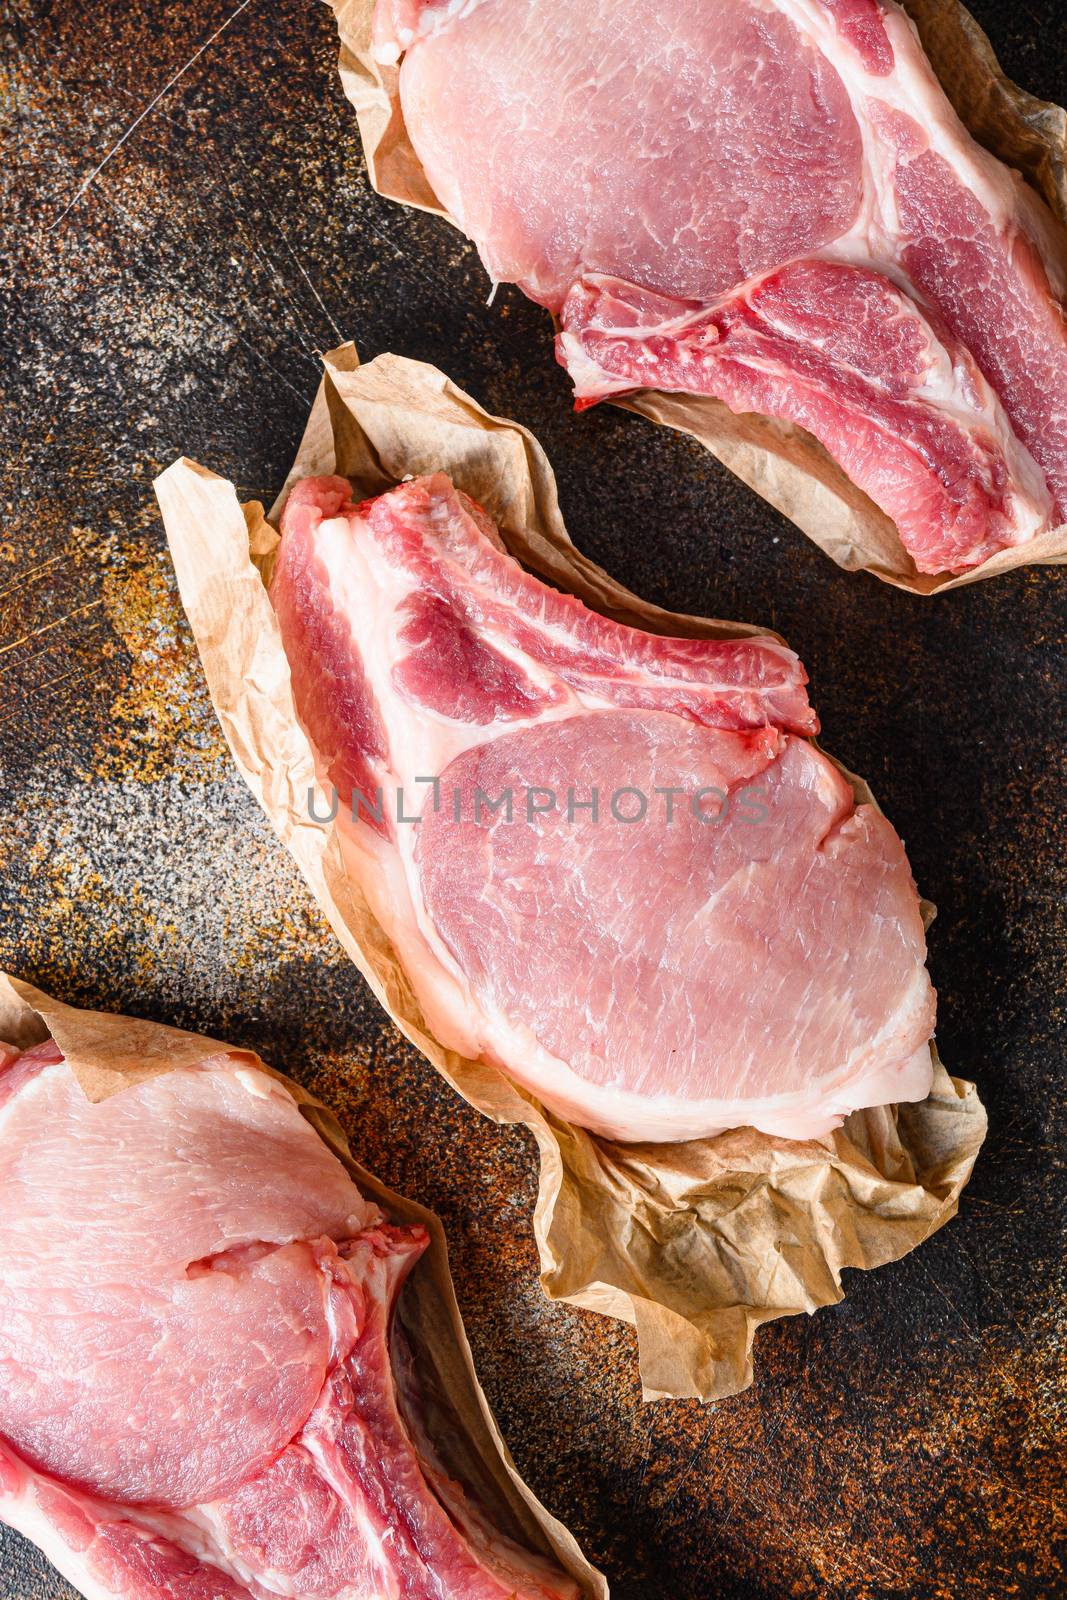 Raw pork loin chops shot from above on craft paper over rustic old metal background stock photo by Ilianesolenyi